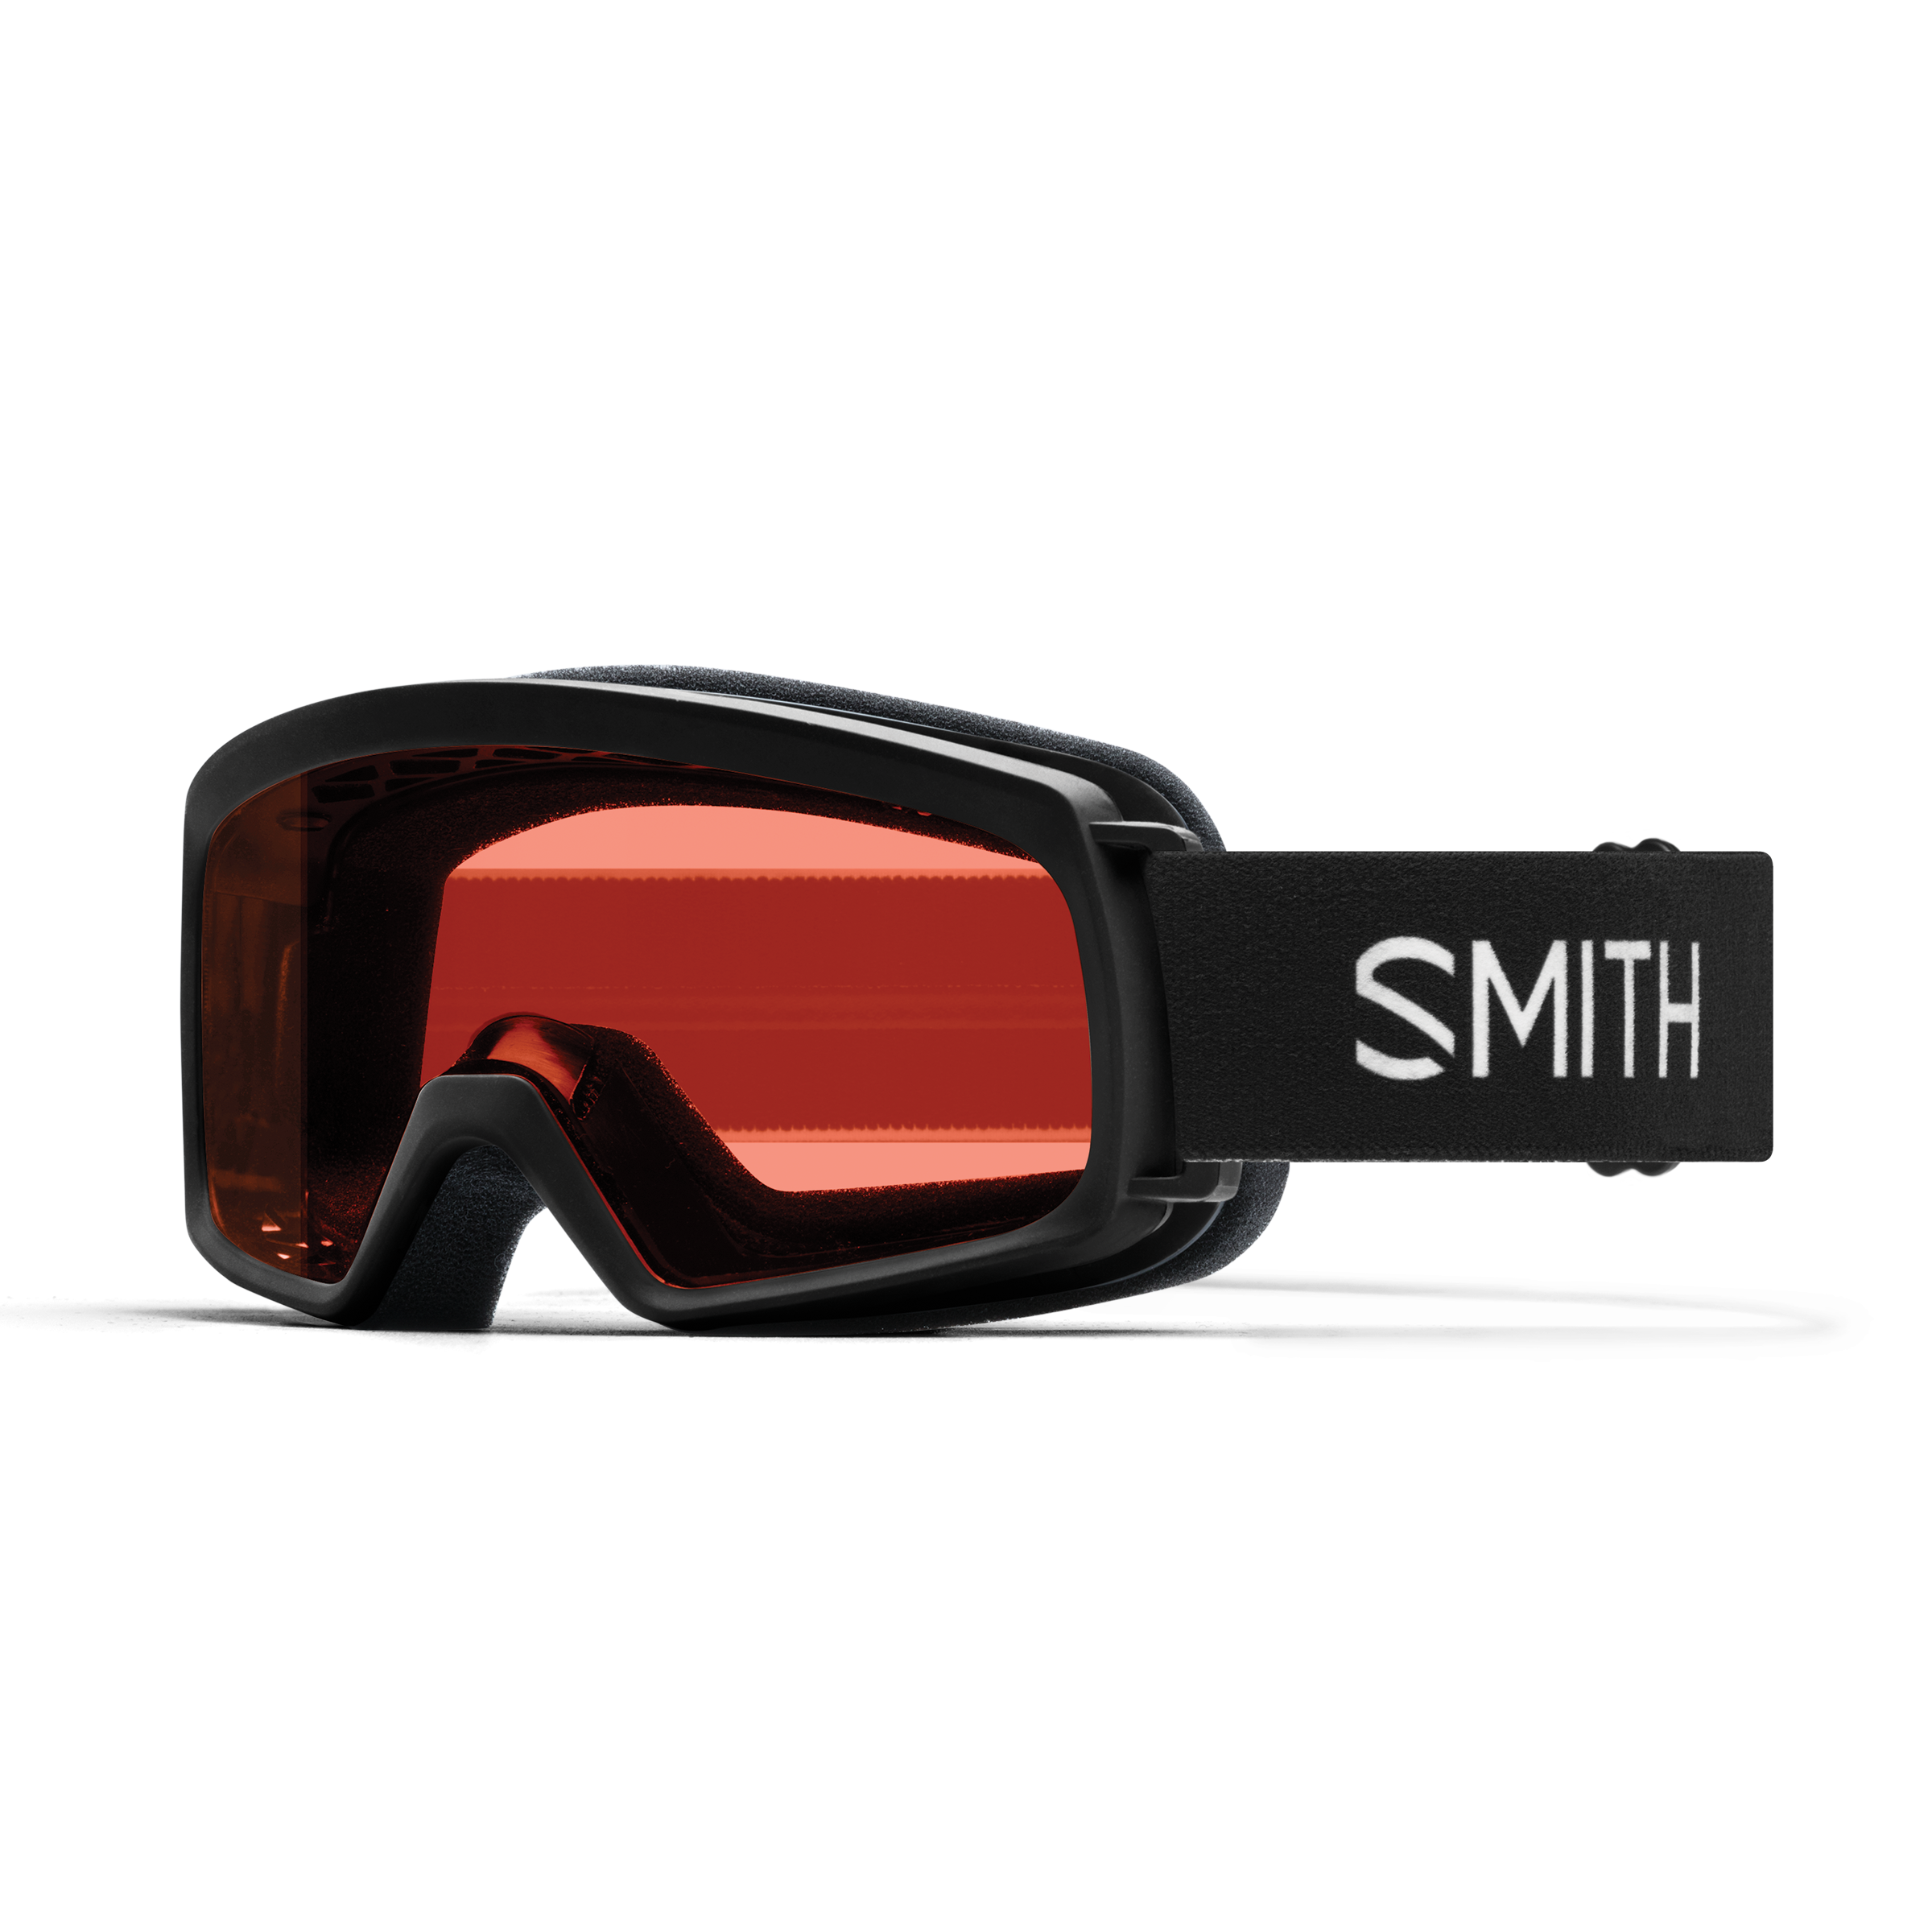 Smith Optics Snowboard Ski Childrens Goggles   Many Styles and Colors 